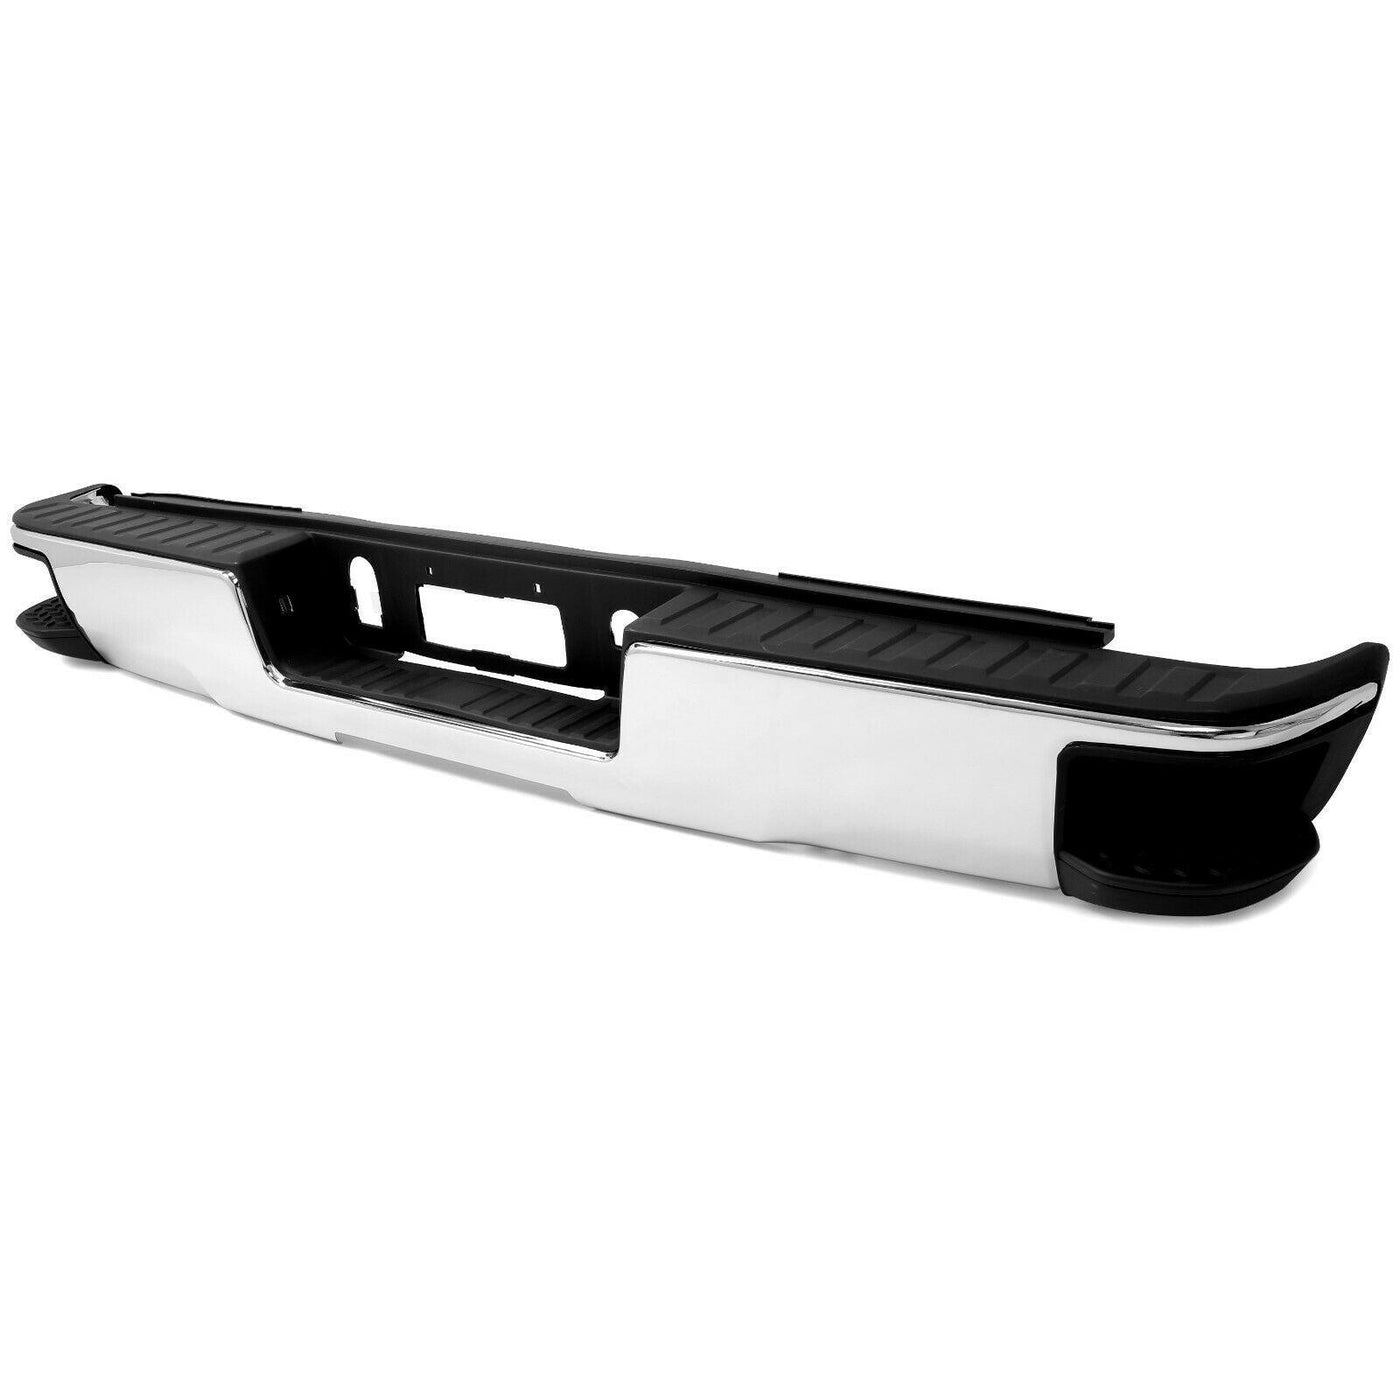 NEW Chrome Rear Bumper Assembly For 2014-2018 Chevy Silverado GMC Sierra 1500 - Moto Life Products